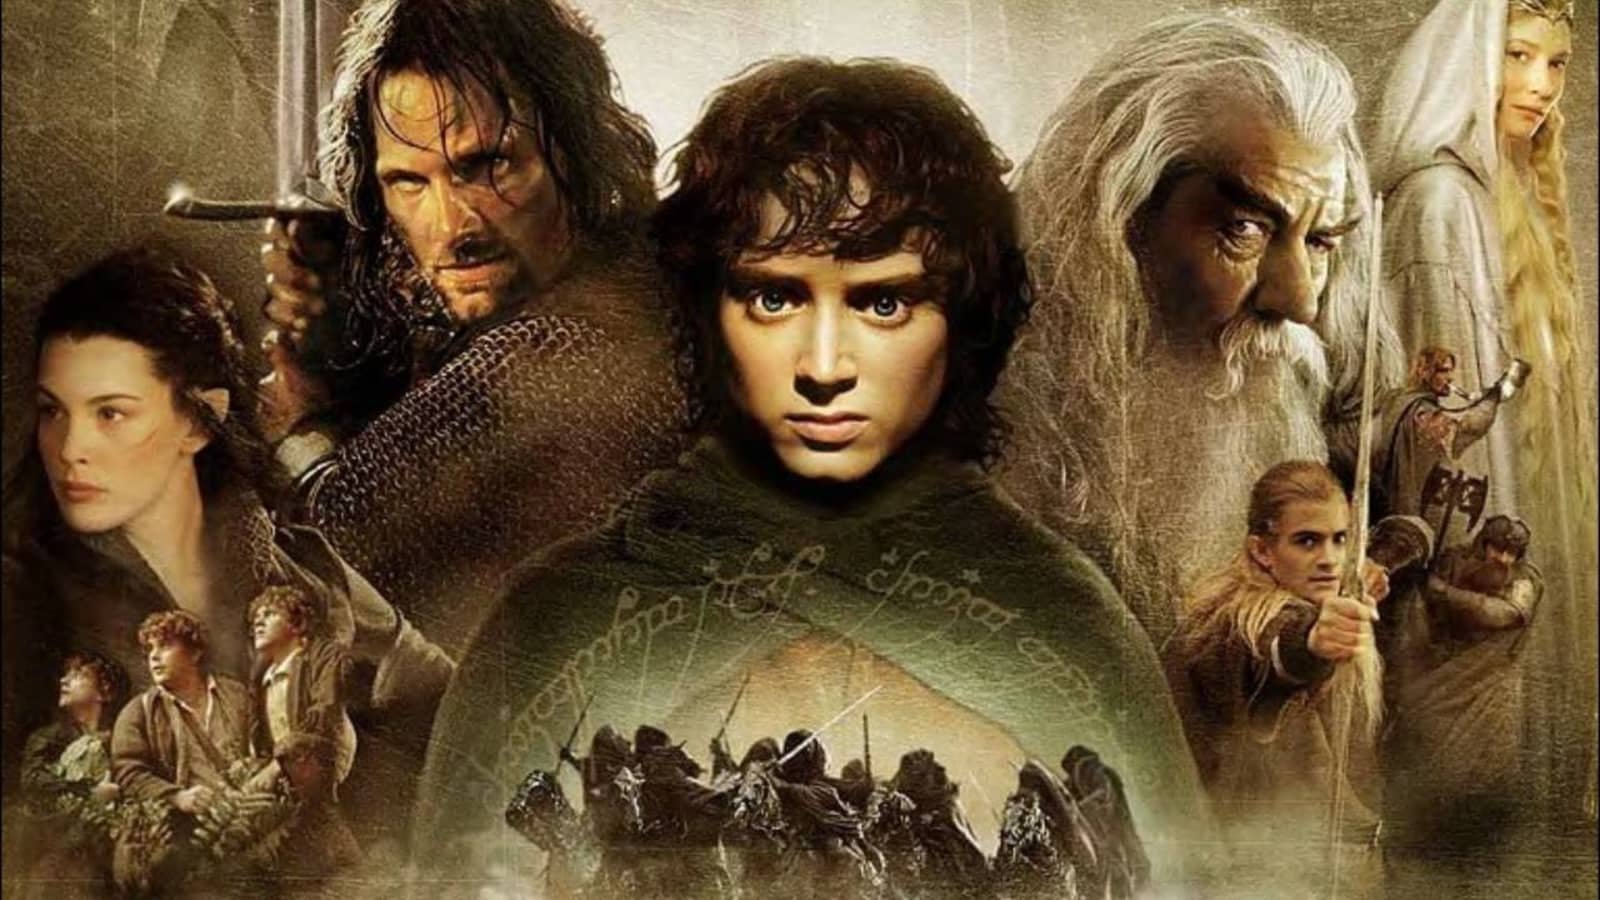 Best action movies on hbo max: Lord of the Rings Fellowship of the Ring